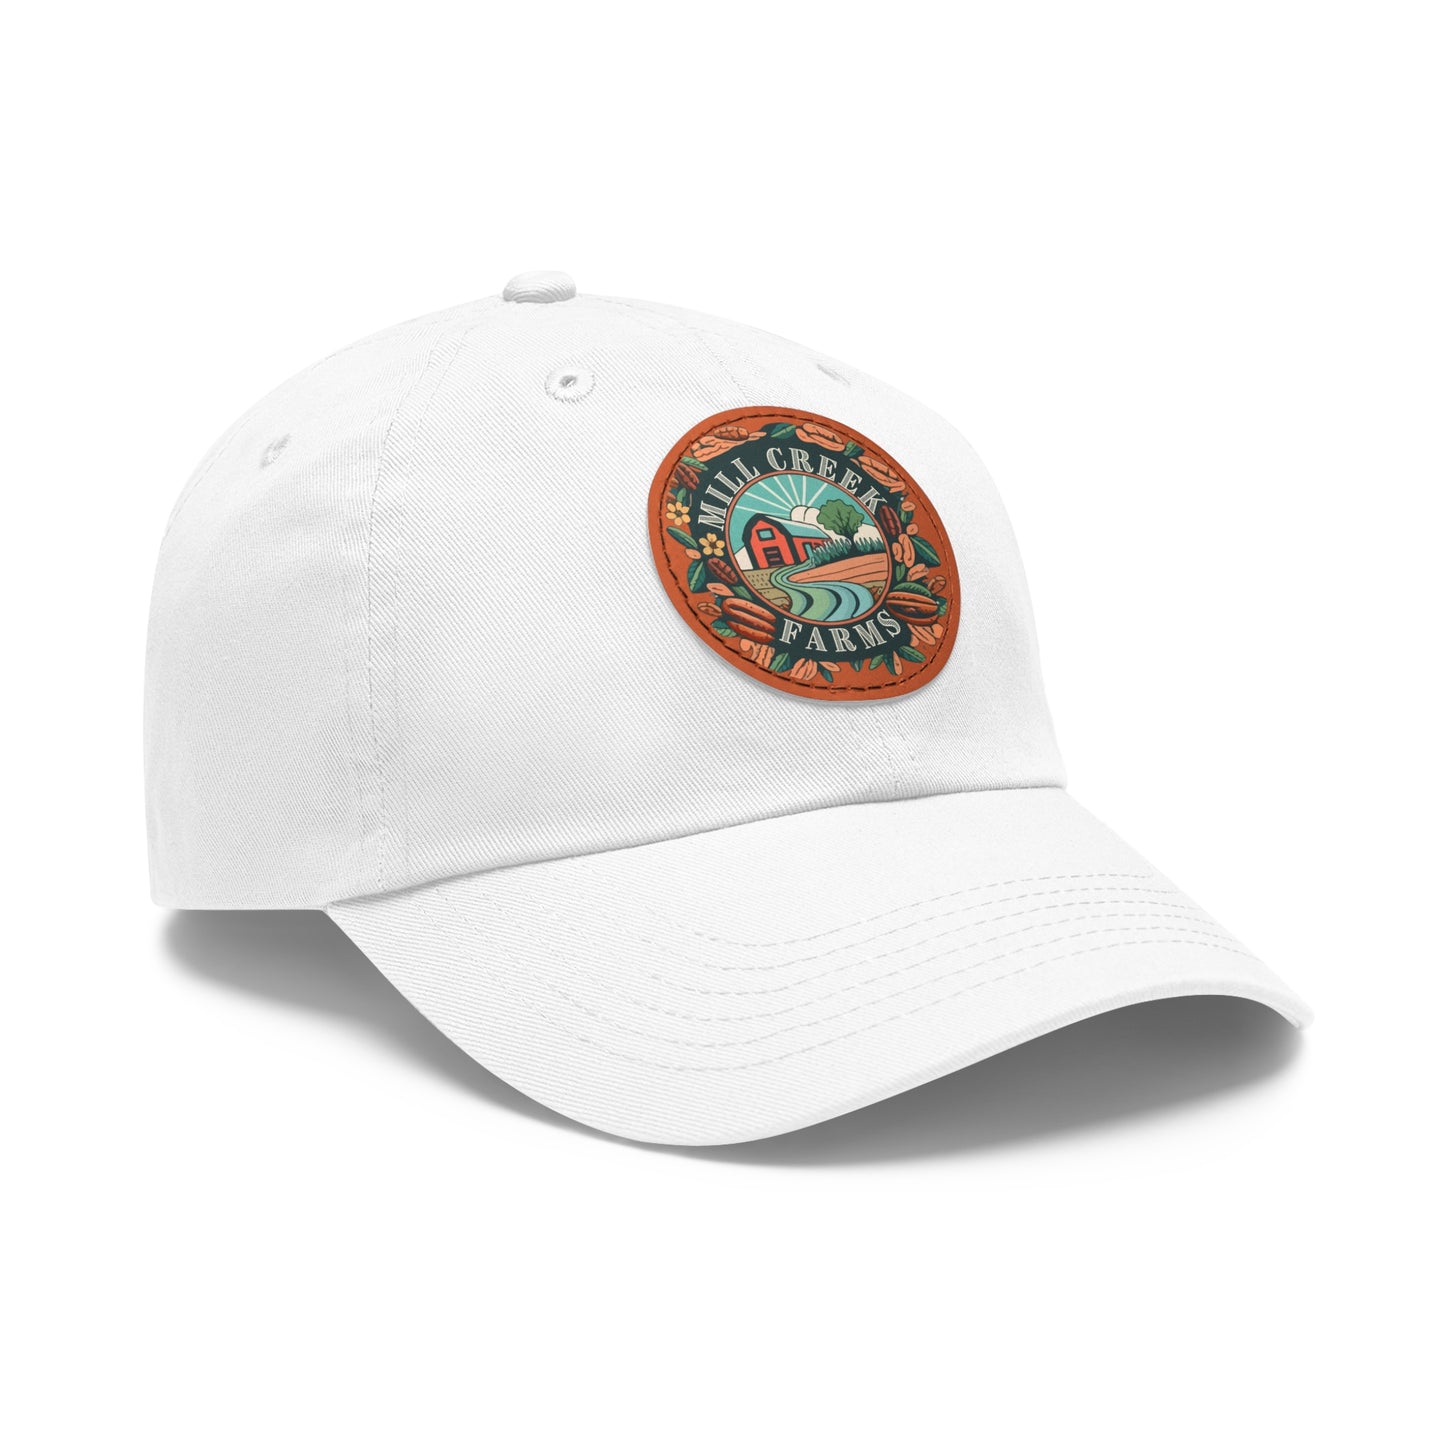 Mill Creek Farms Official Dad Hat with Leather Patch